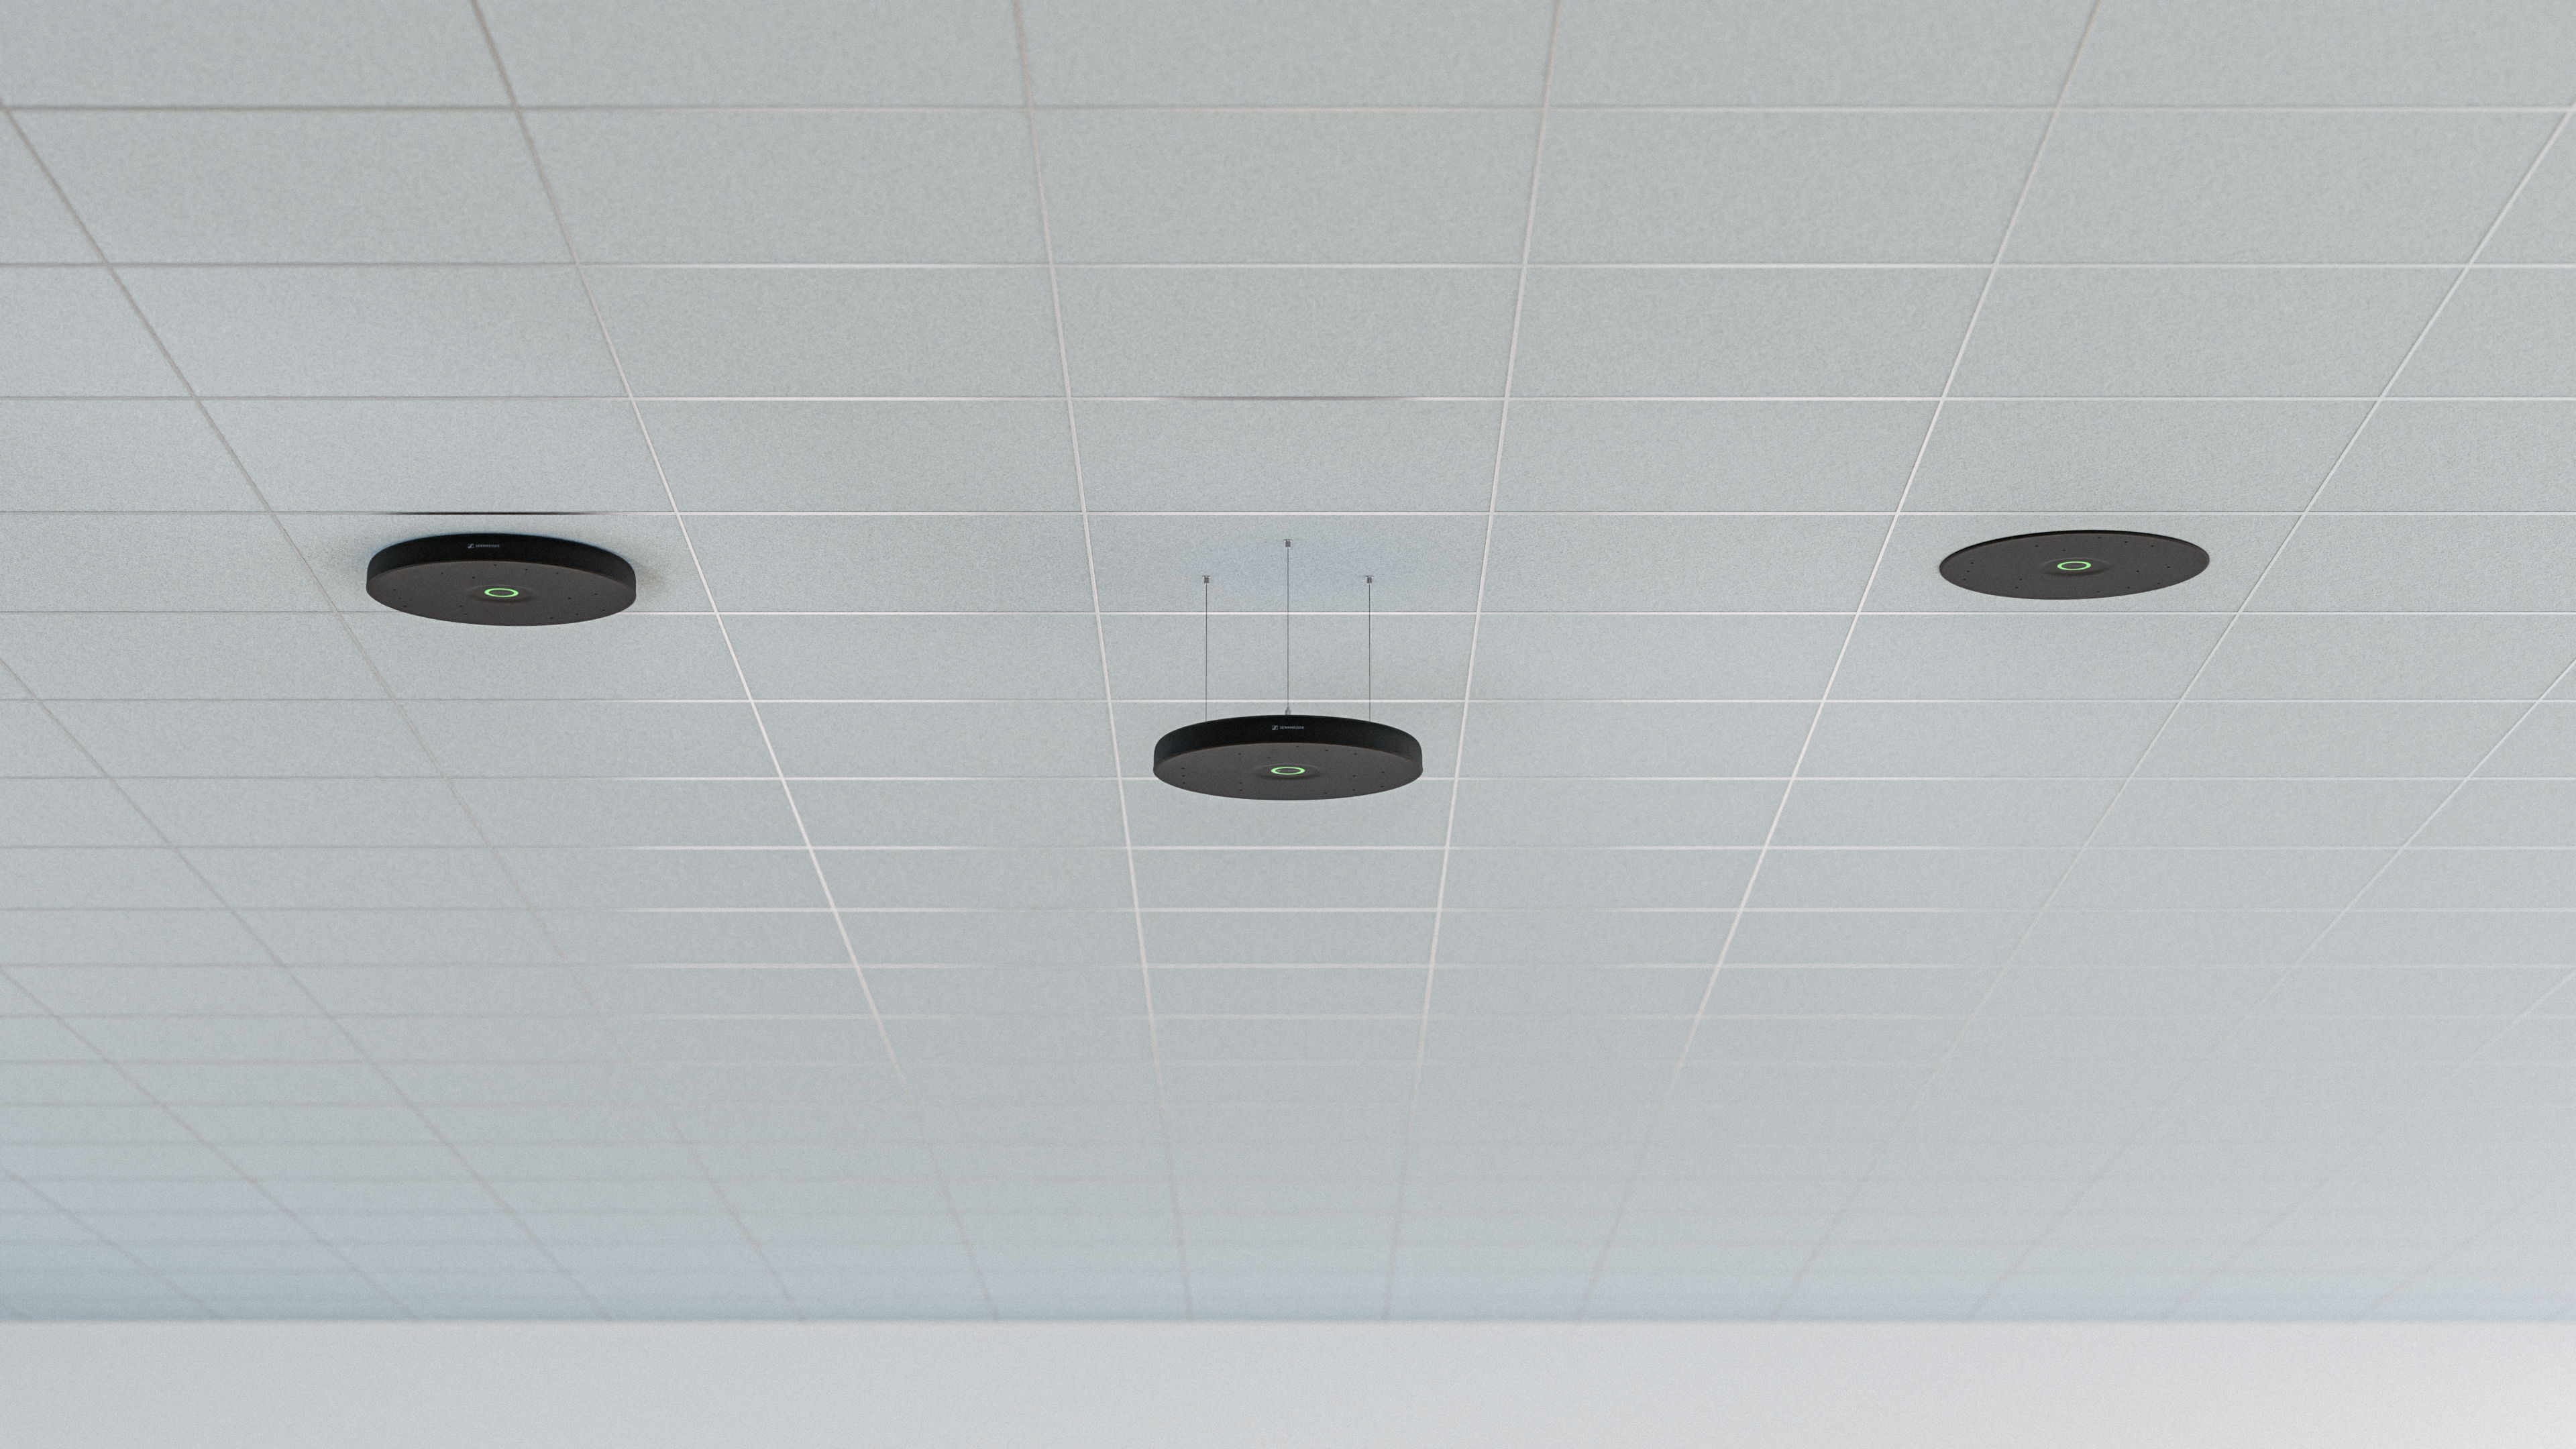 Unlike the TCC 2, TCC M is round, but does offer the same ceiling installation choices - surface mounted, suspended, or flush mounted